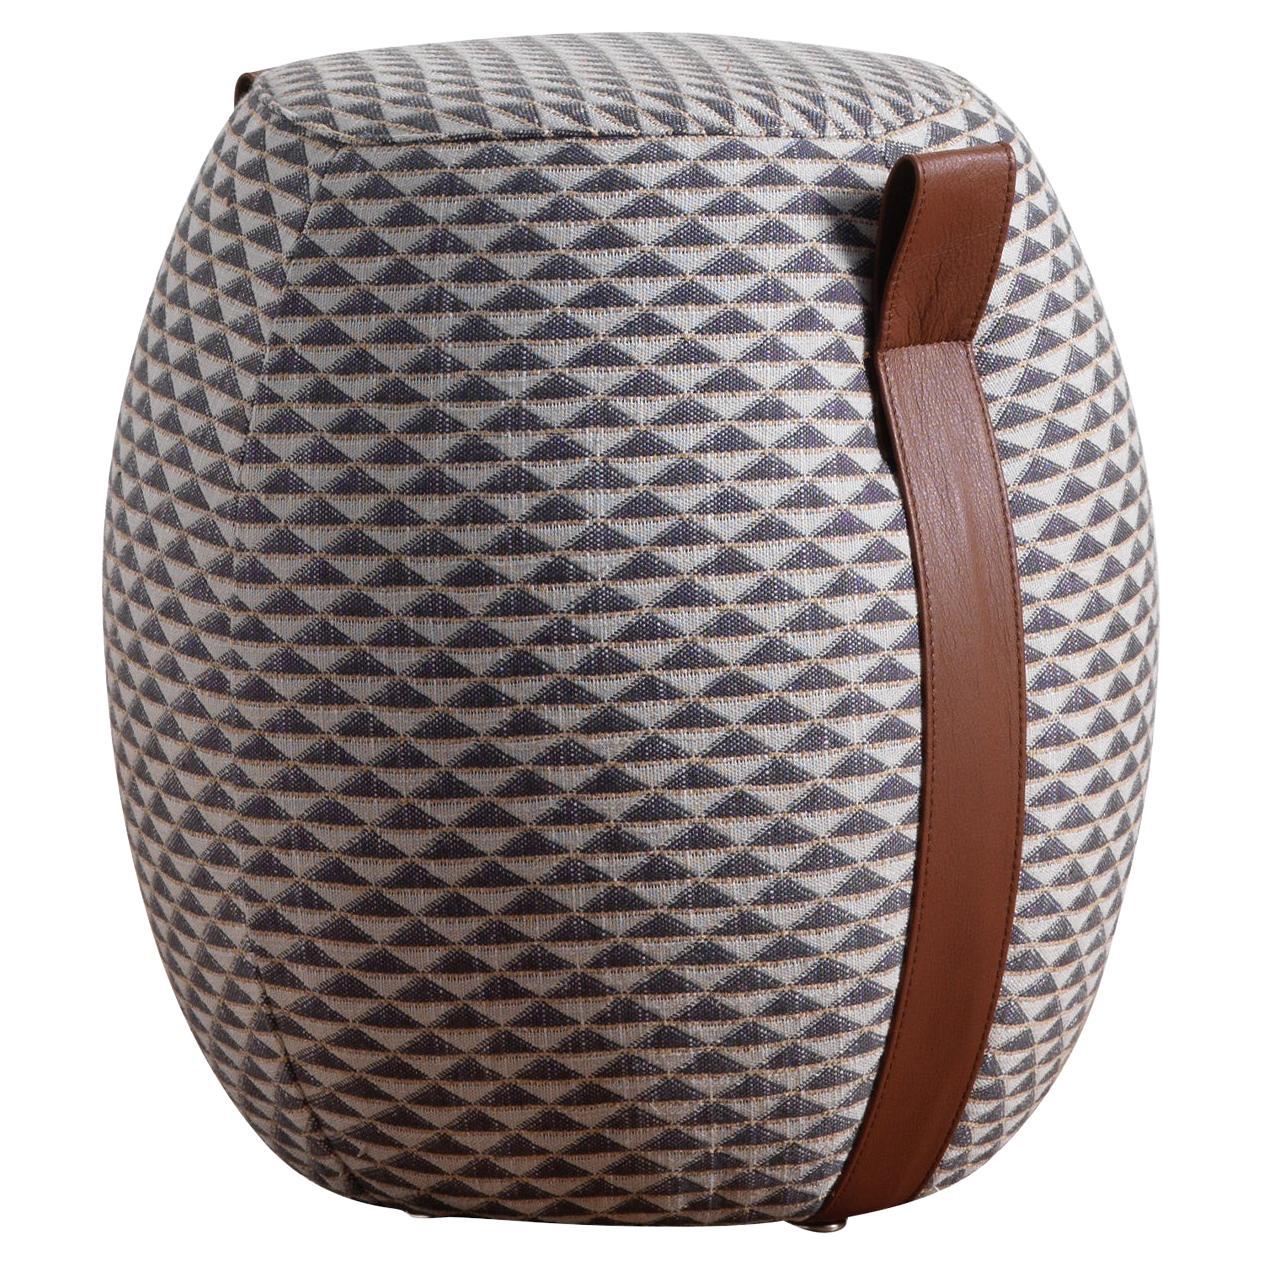 Domino Fabric and Leather Pouf MODO10 Collection For Sale